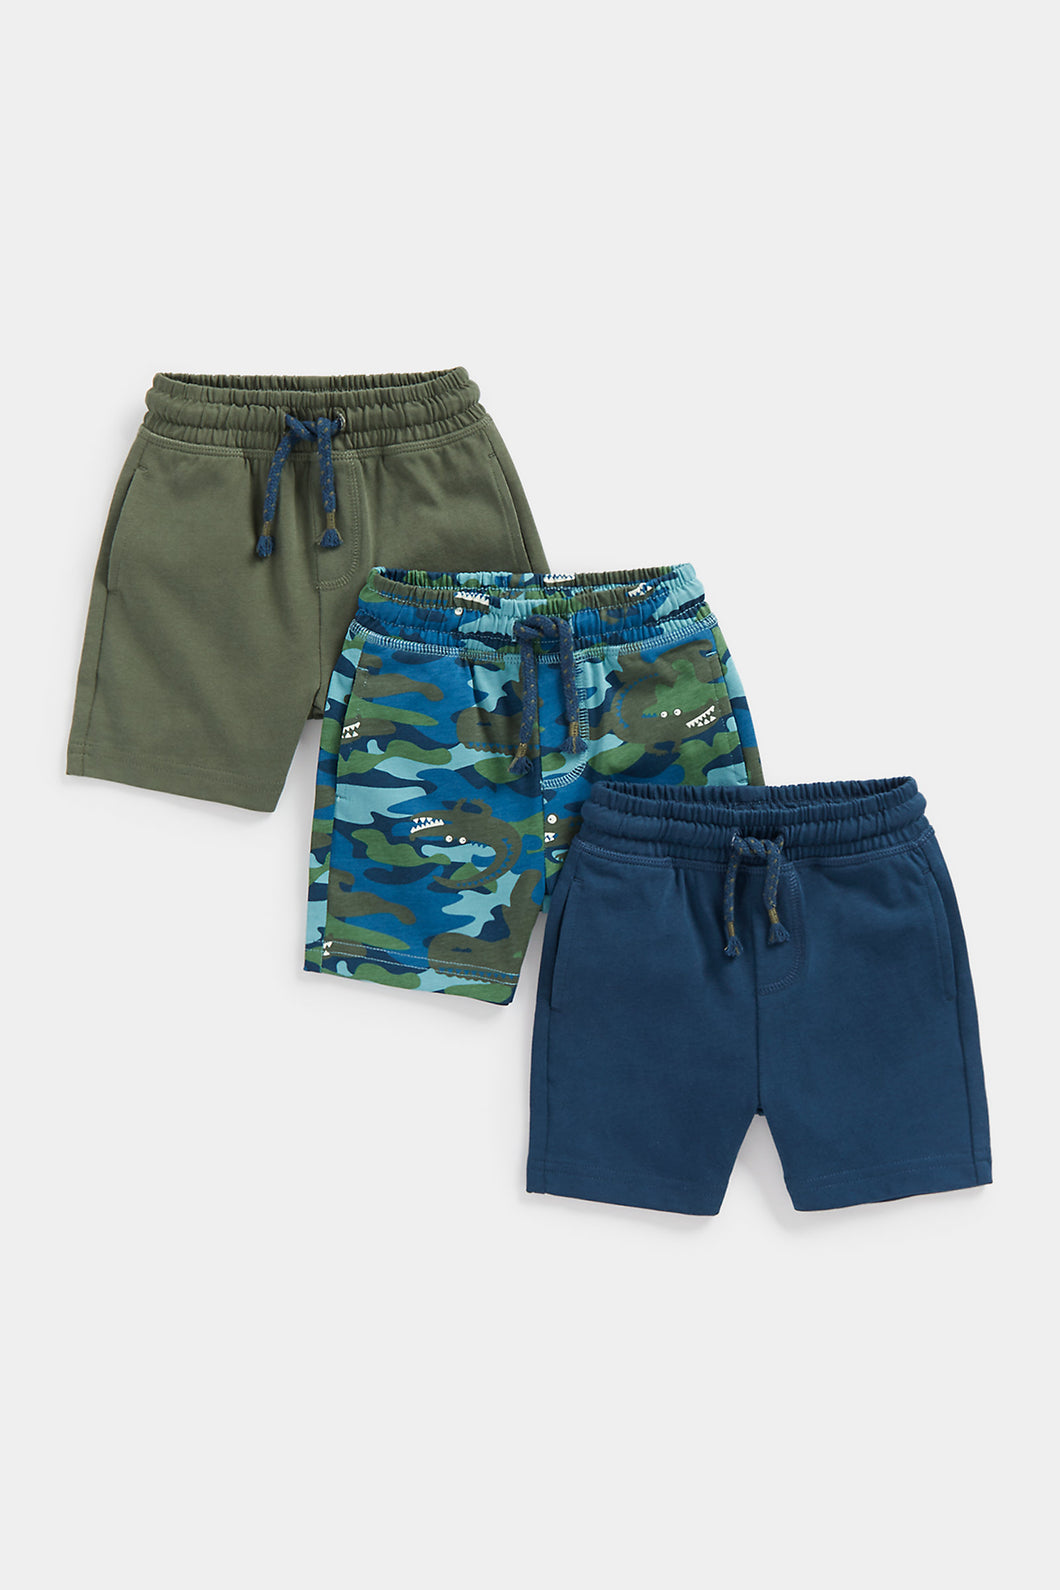 Buy Mothercare Crocs Jersey Shorts - 3 Pack Online in Malaysia ...